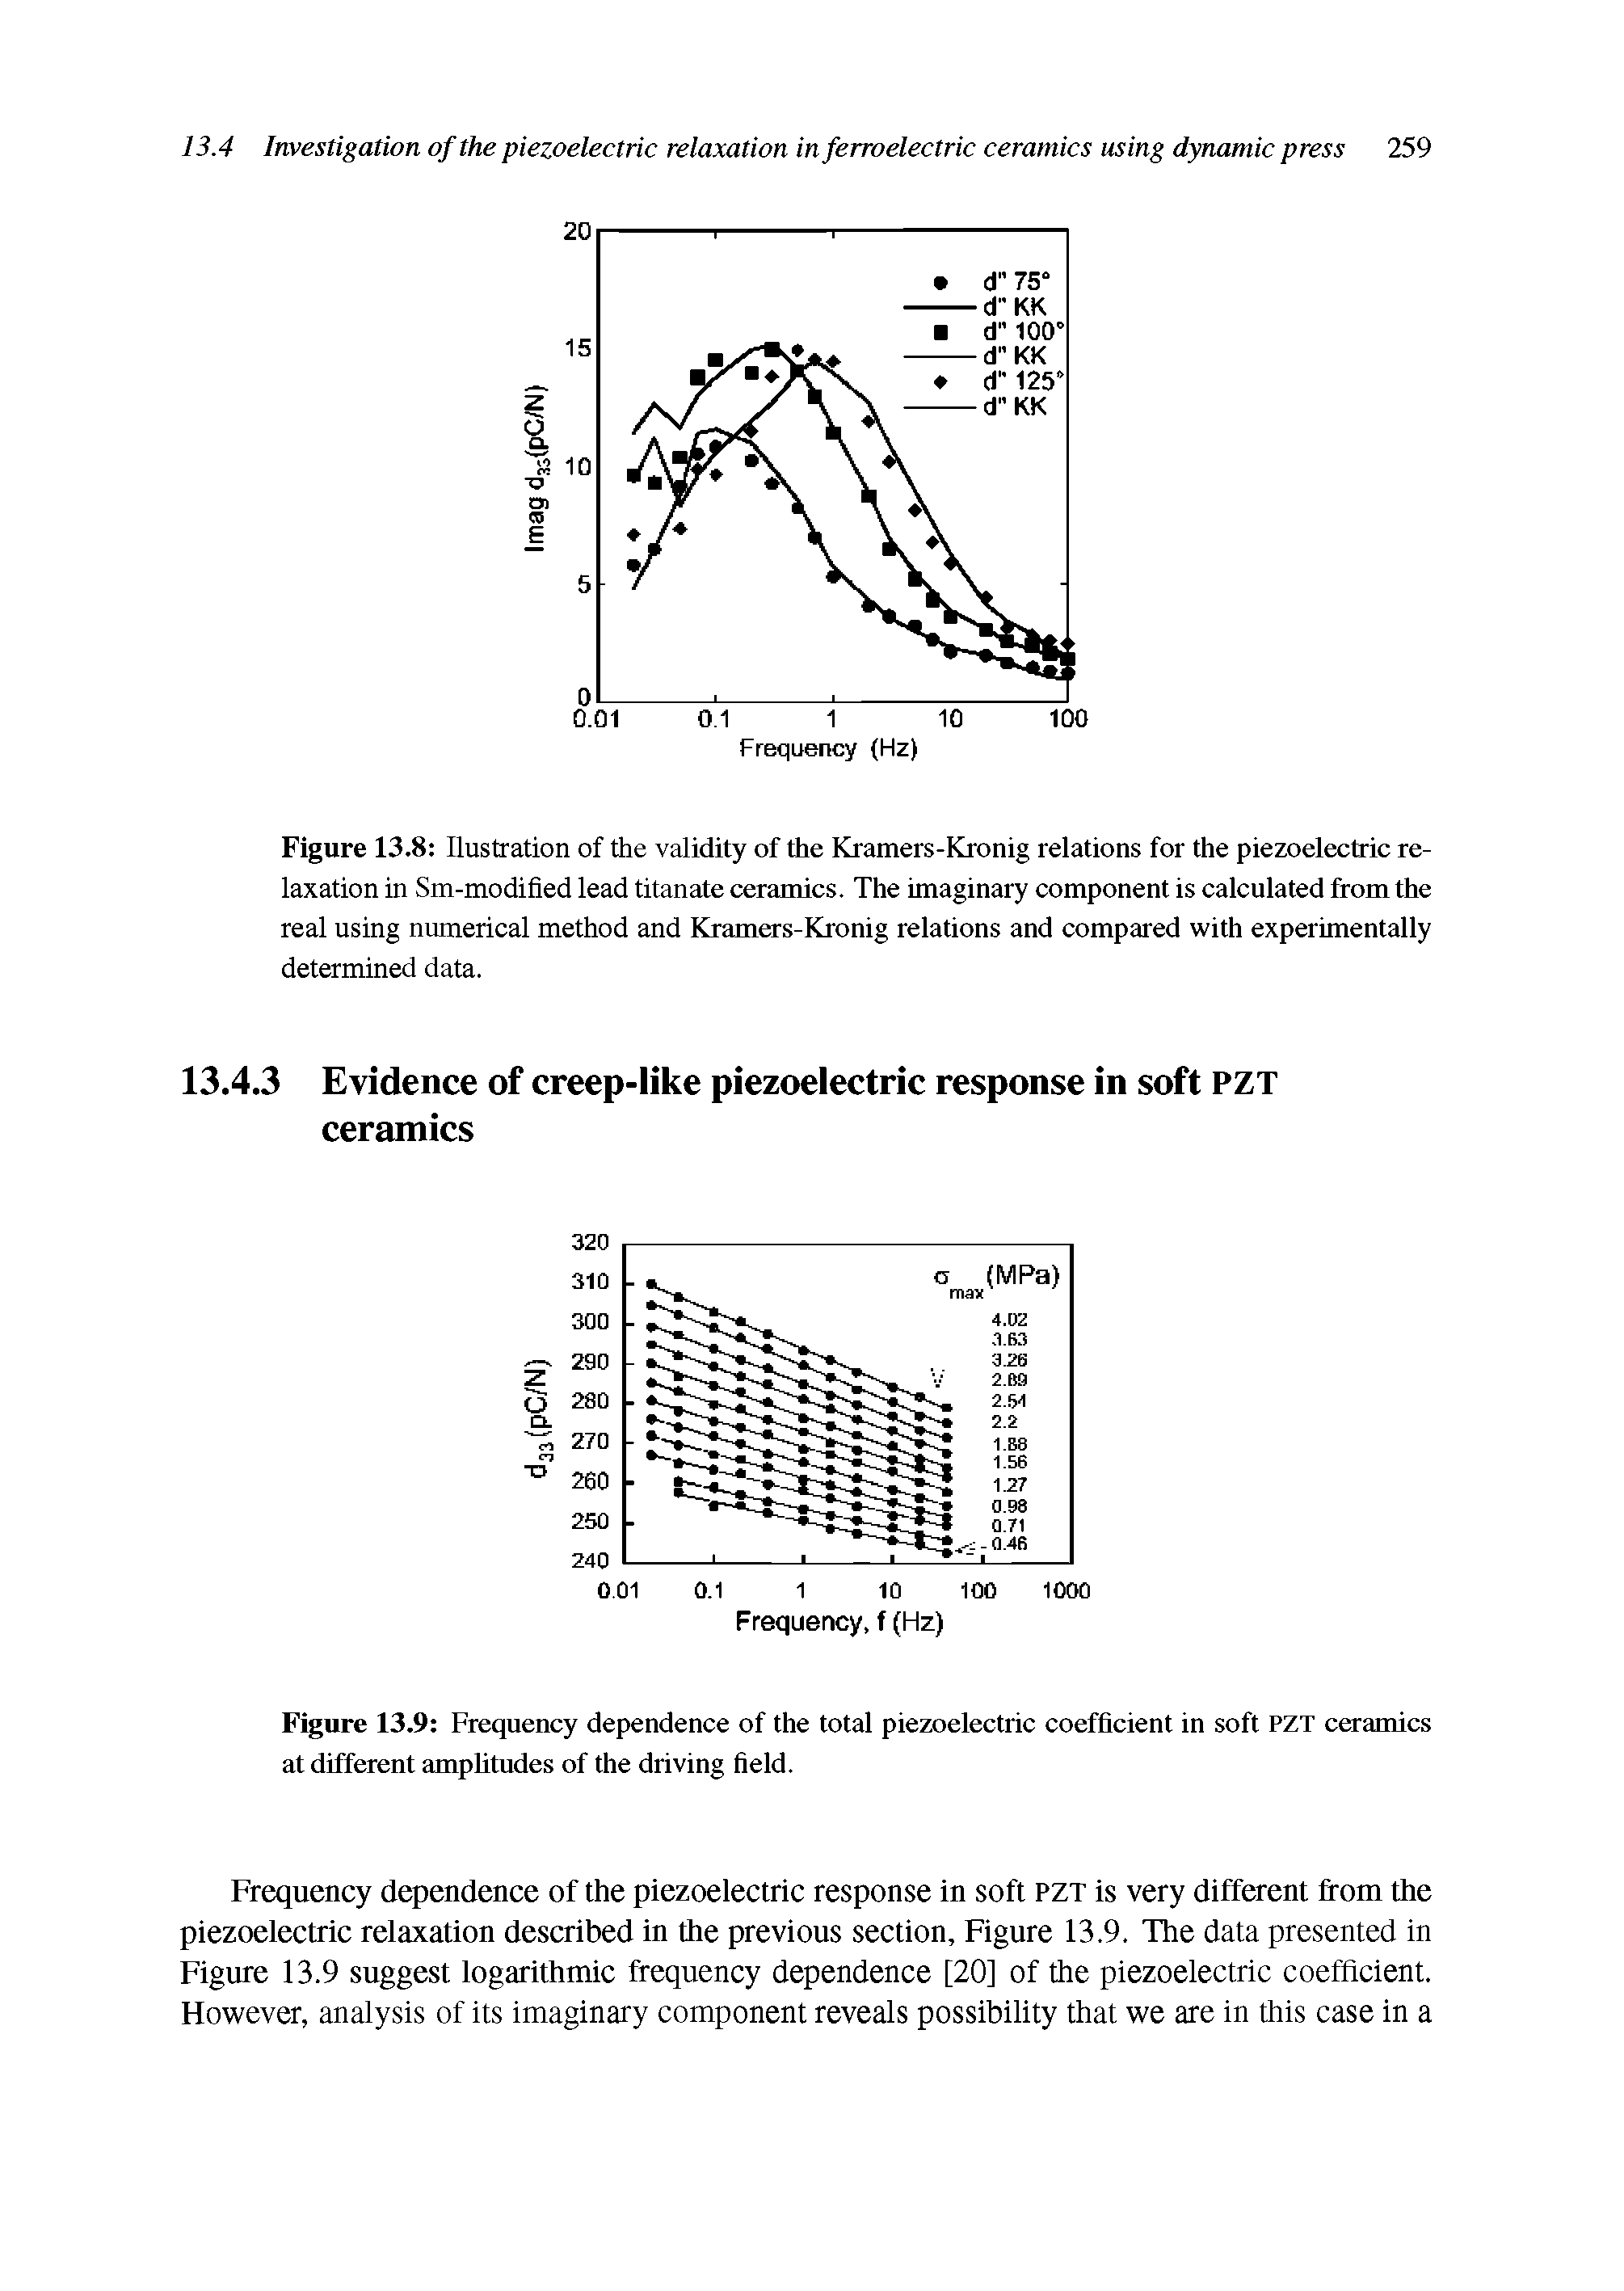 Figure 13.9 Frequency dependence of the total piezoelectric coefficient in soft PZT ceramics at different amplitudes of the driving field.